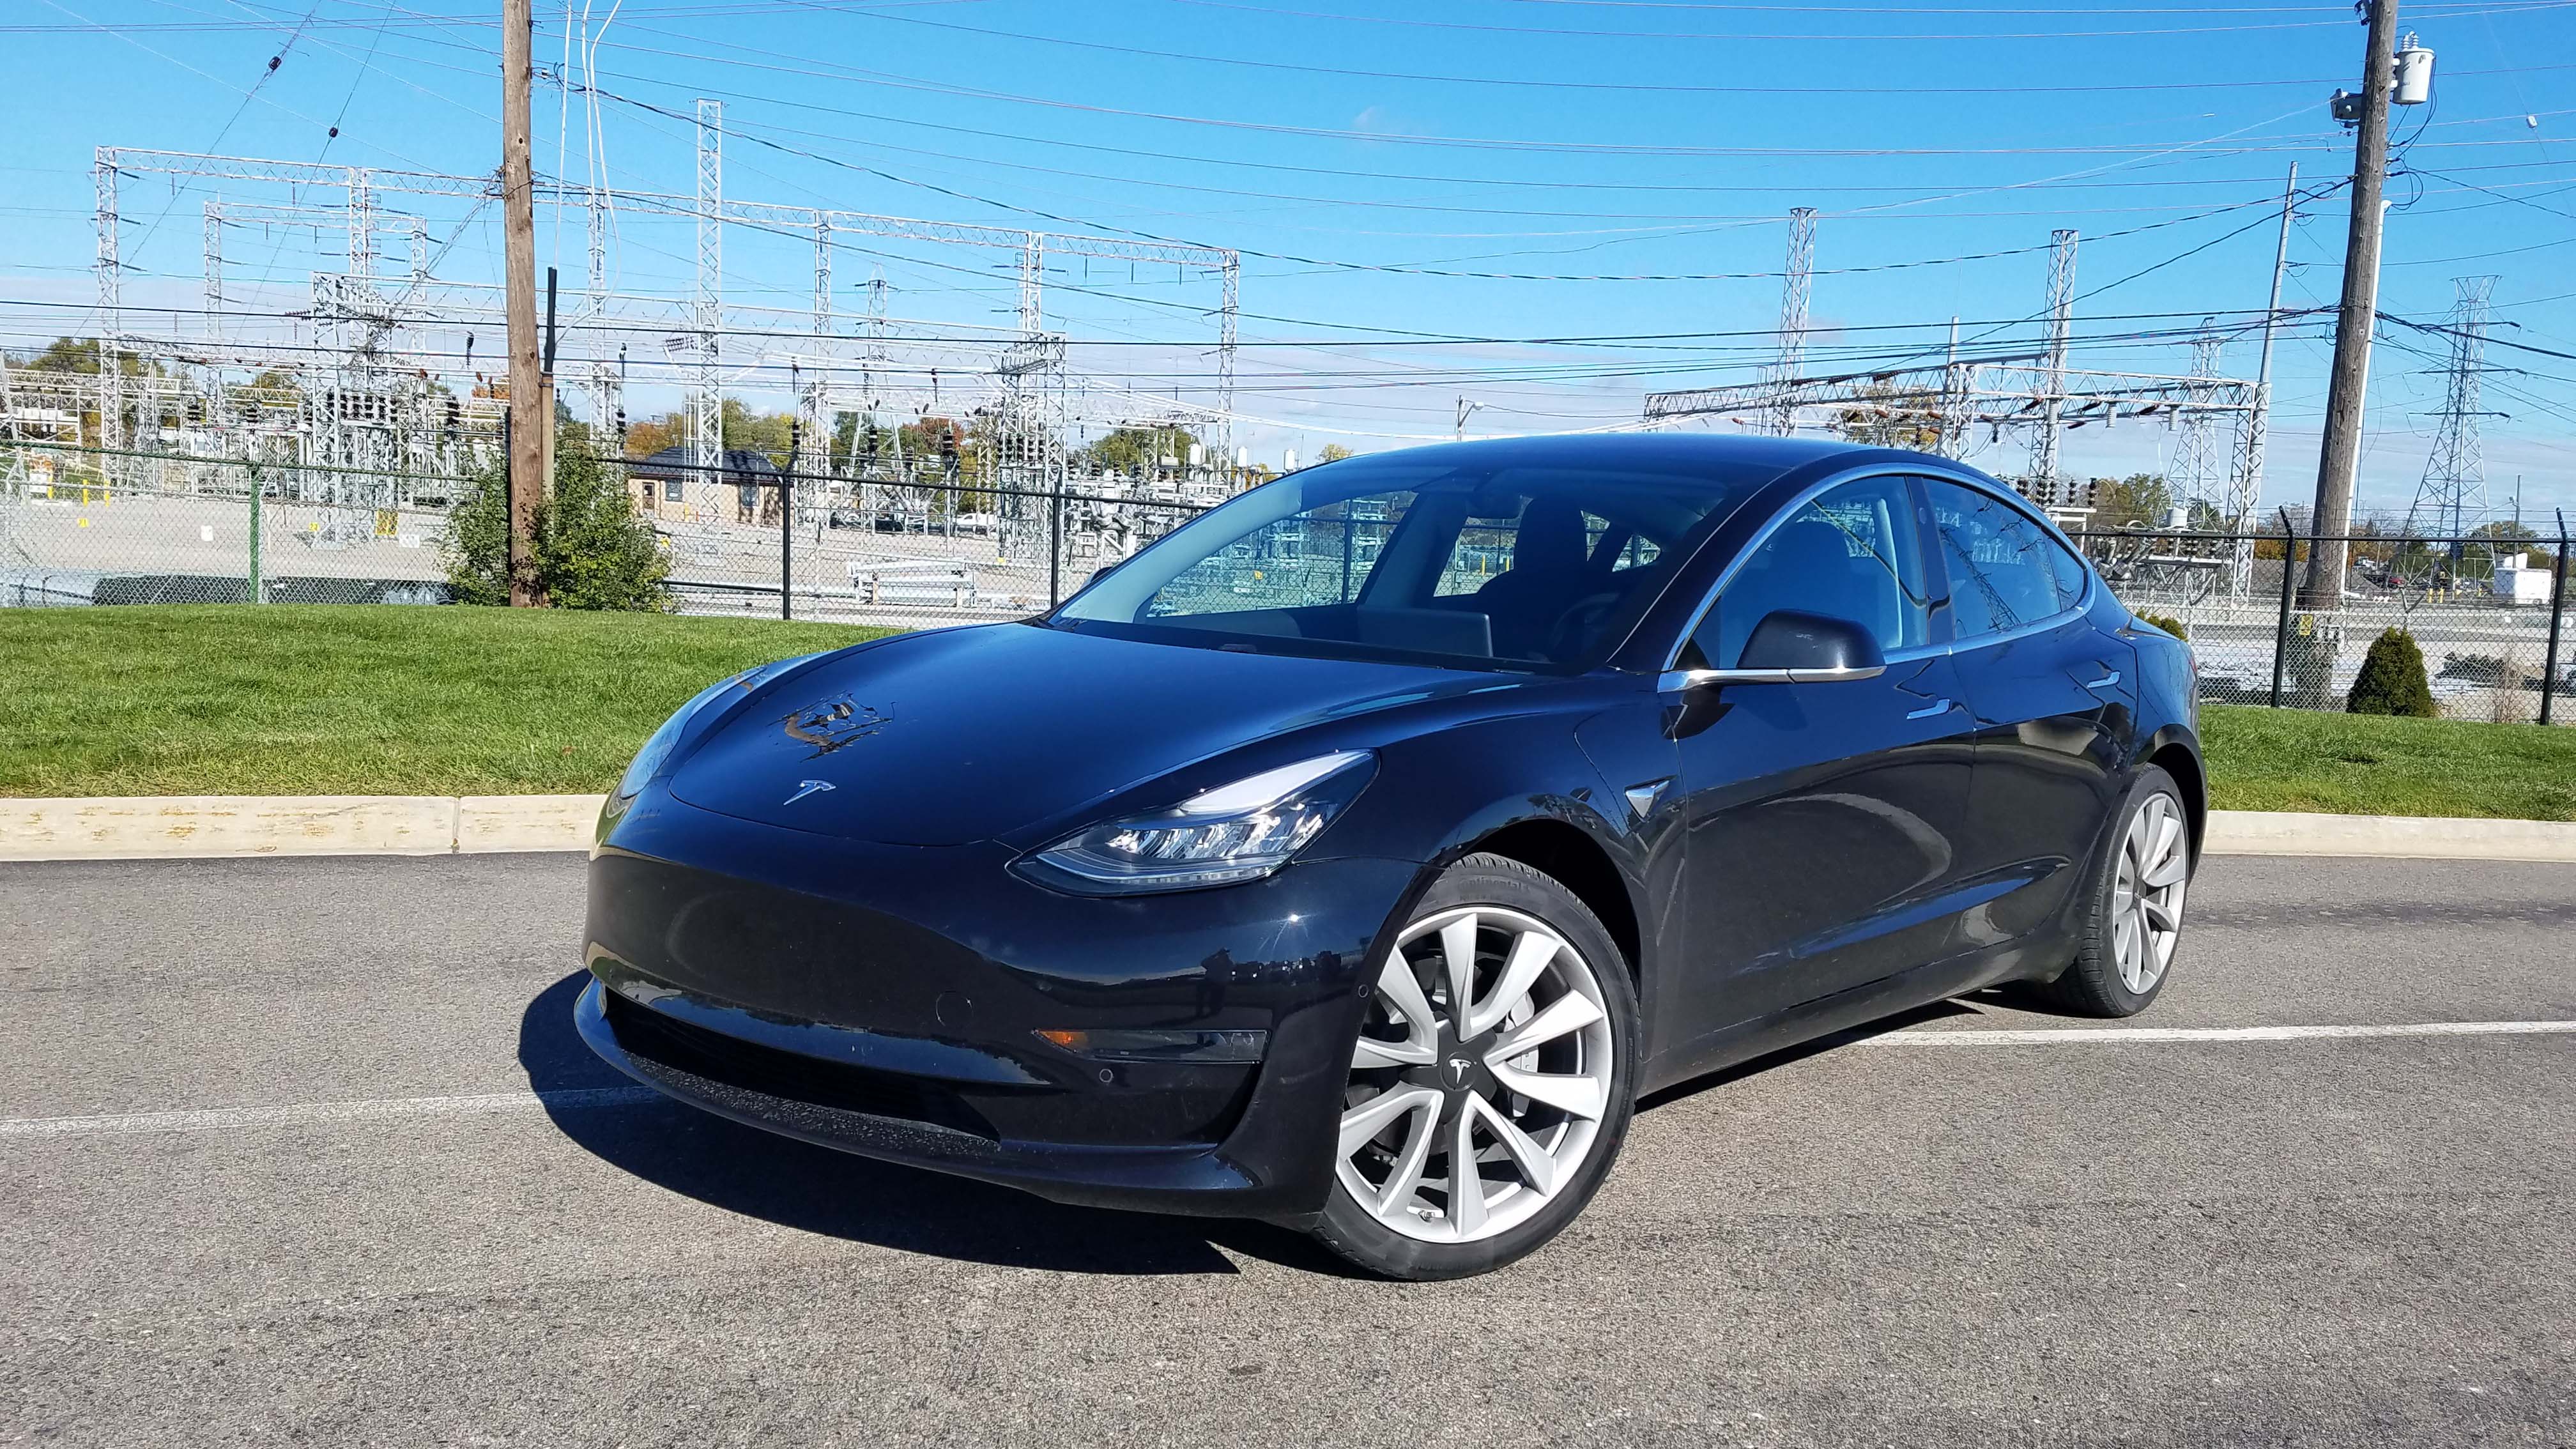 Including $1,000 and $2,500 deposits, Payne's Tesla Model 3 cost $57,450. He'll get $7,500 of that back on his taxes due to a federal EV tax credit — though Payne will probably just blow it on more wheels or something.